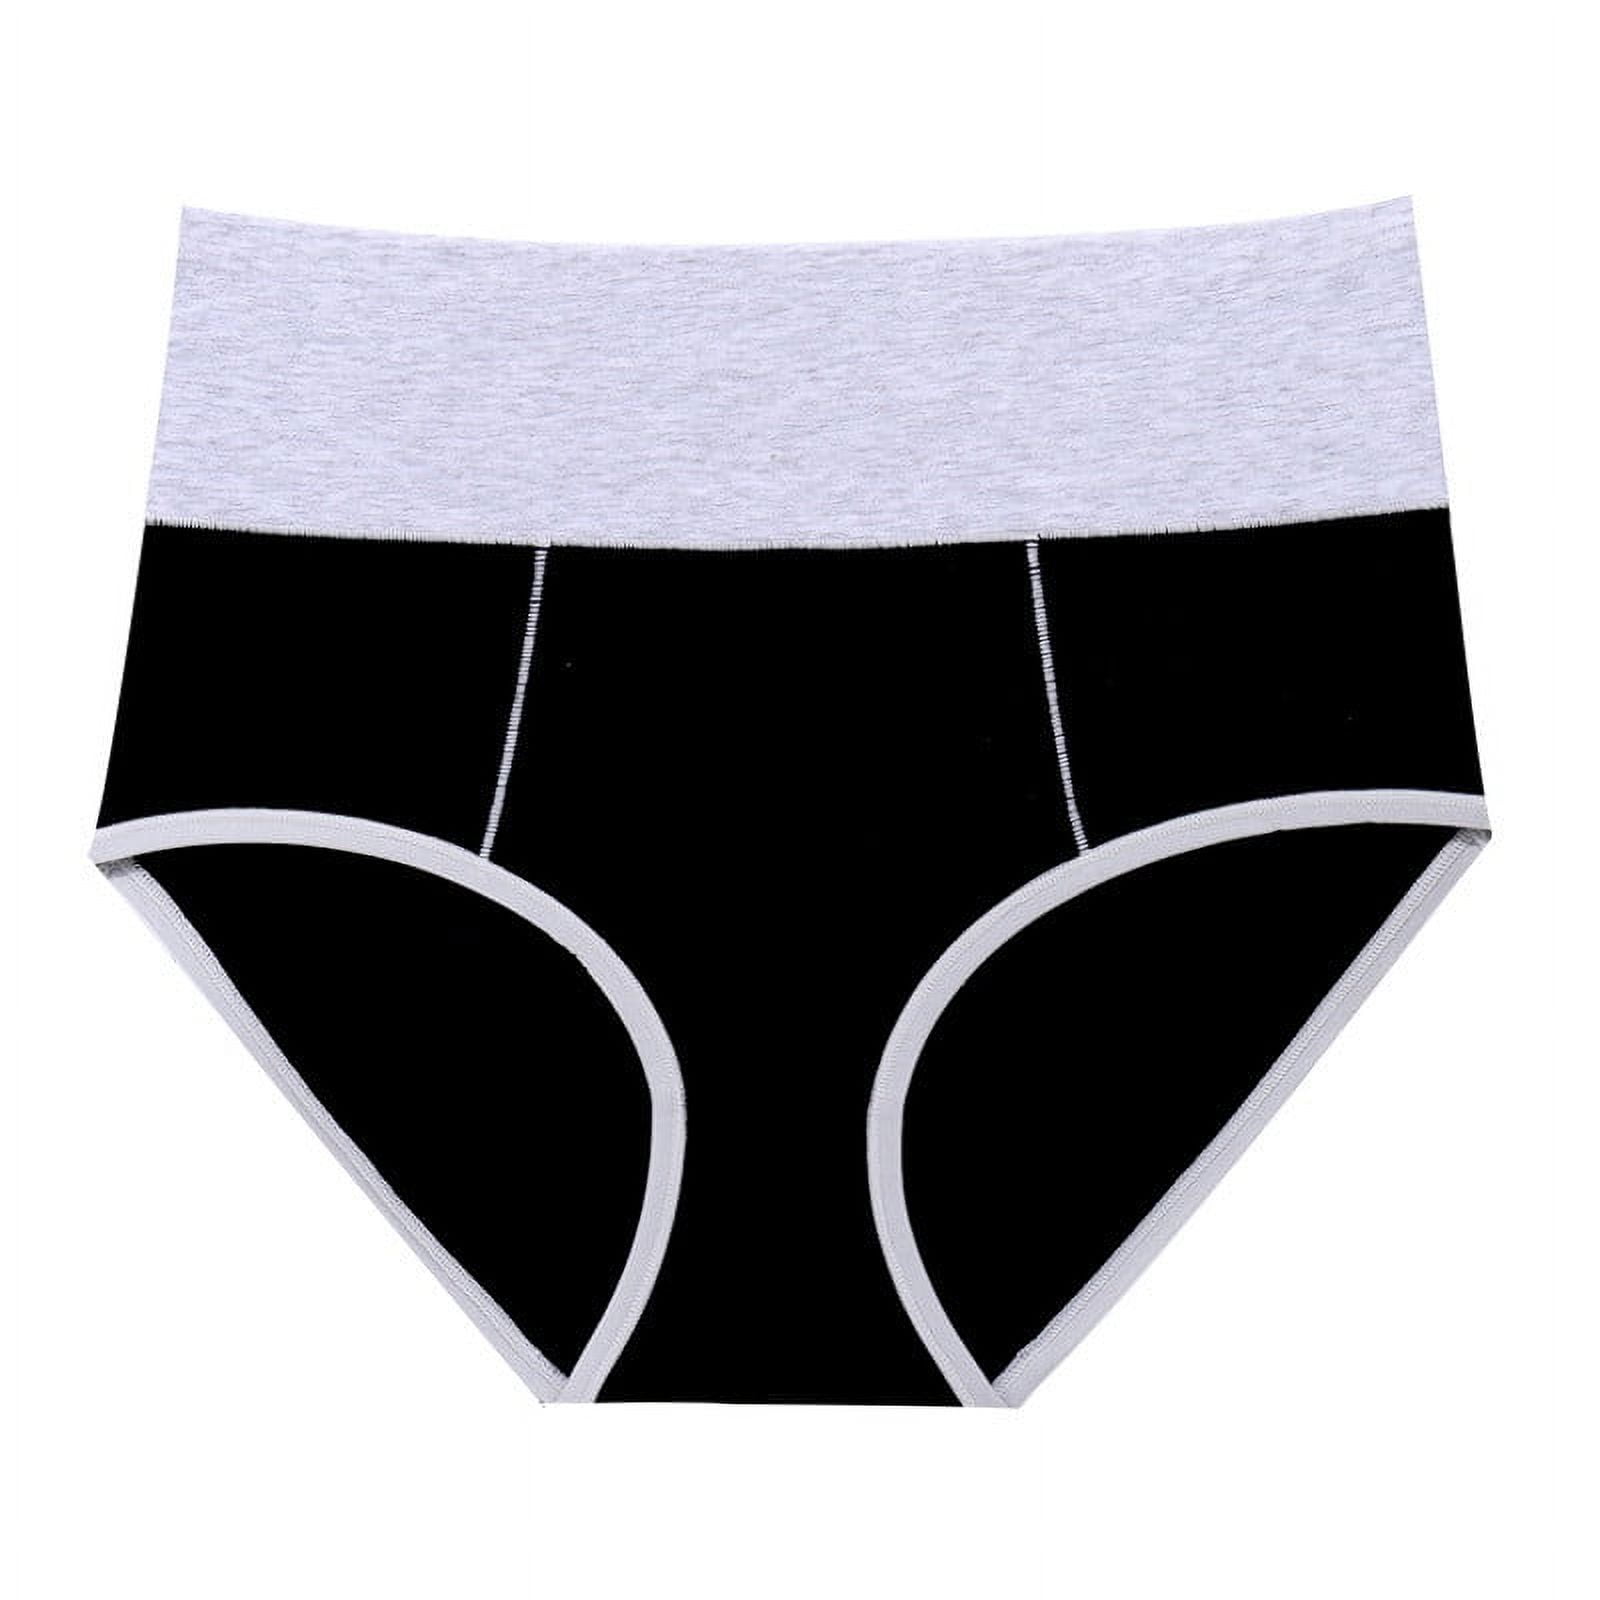 Buy IFG Control Brief 001 for women at